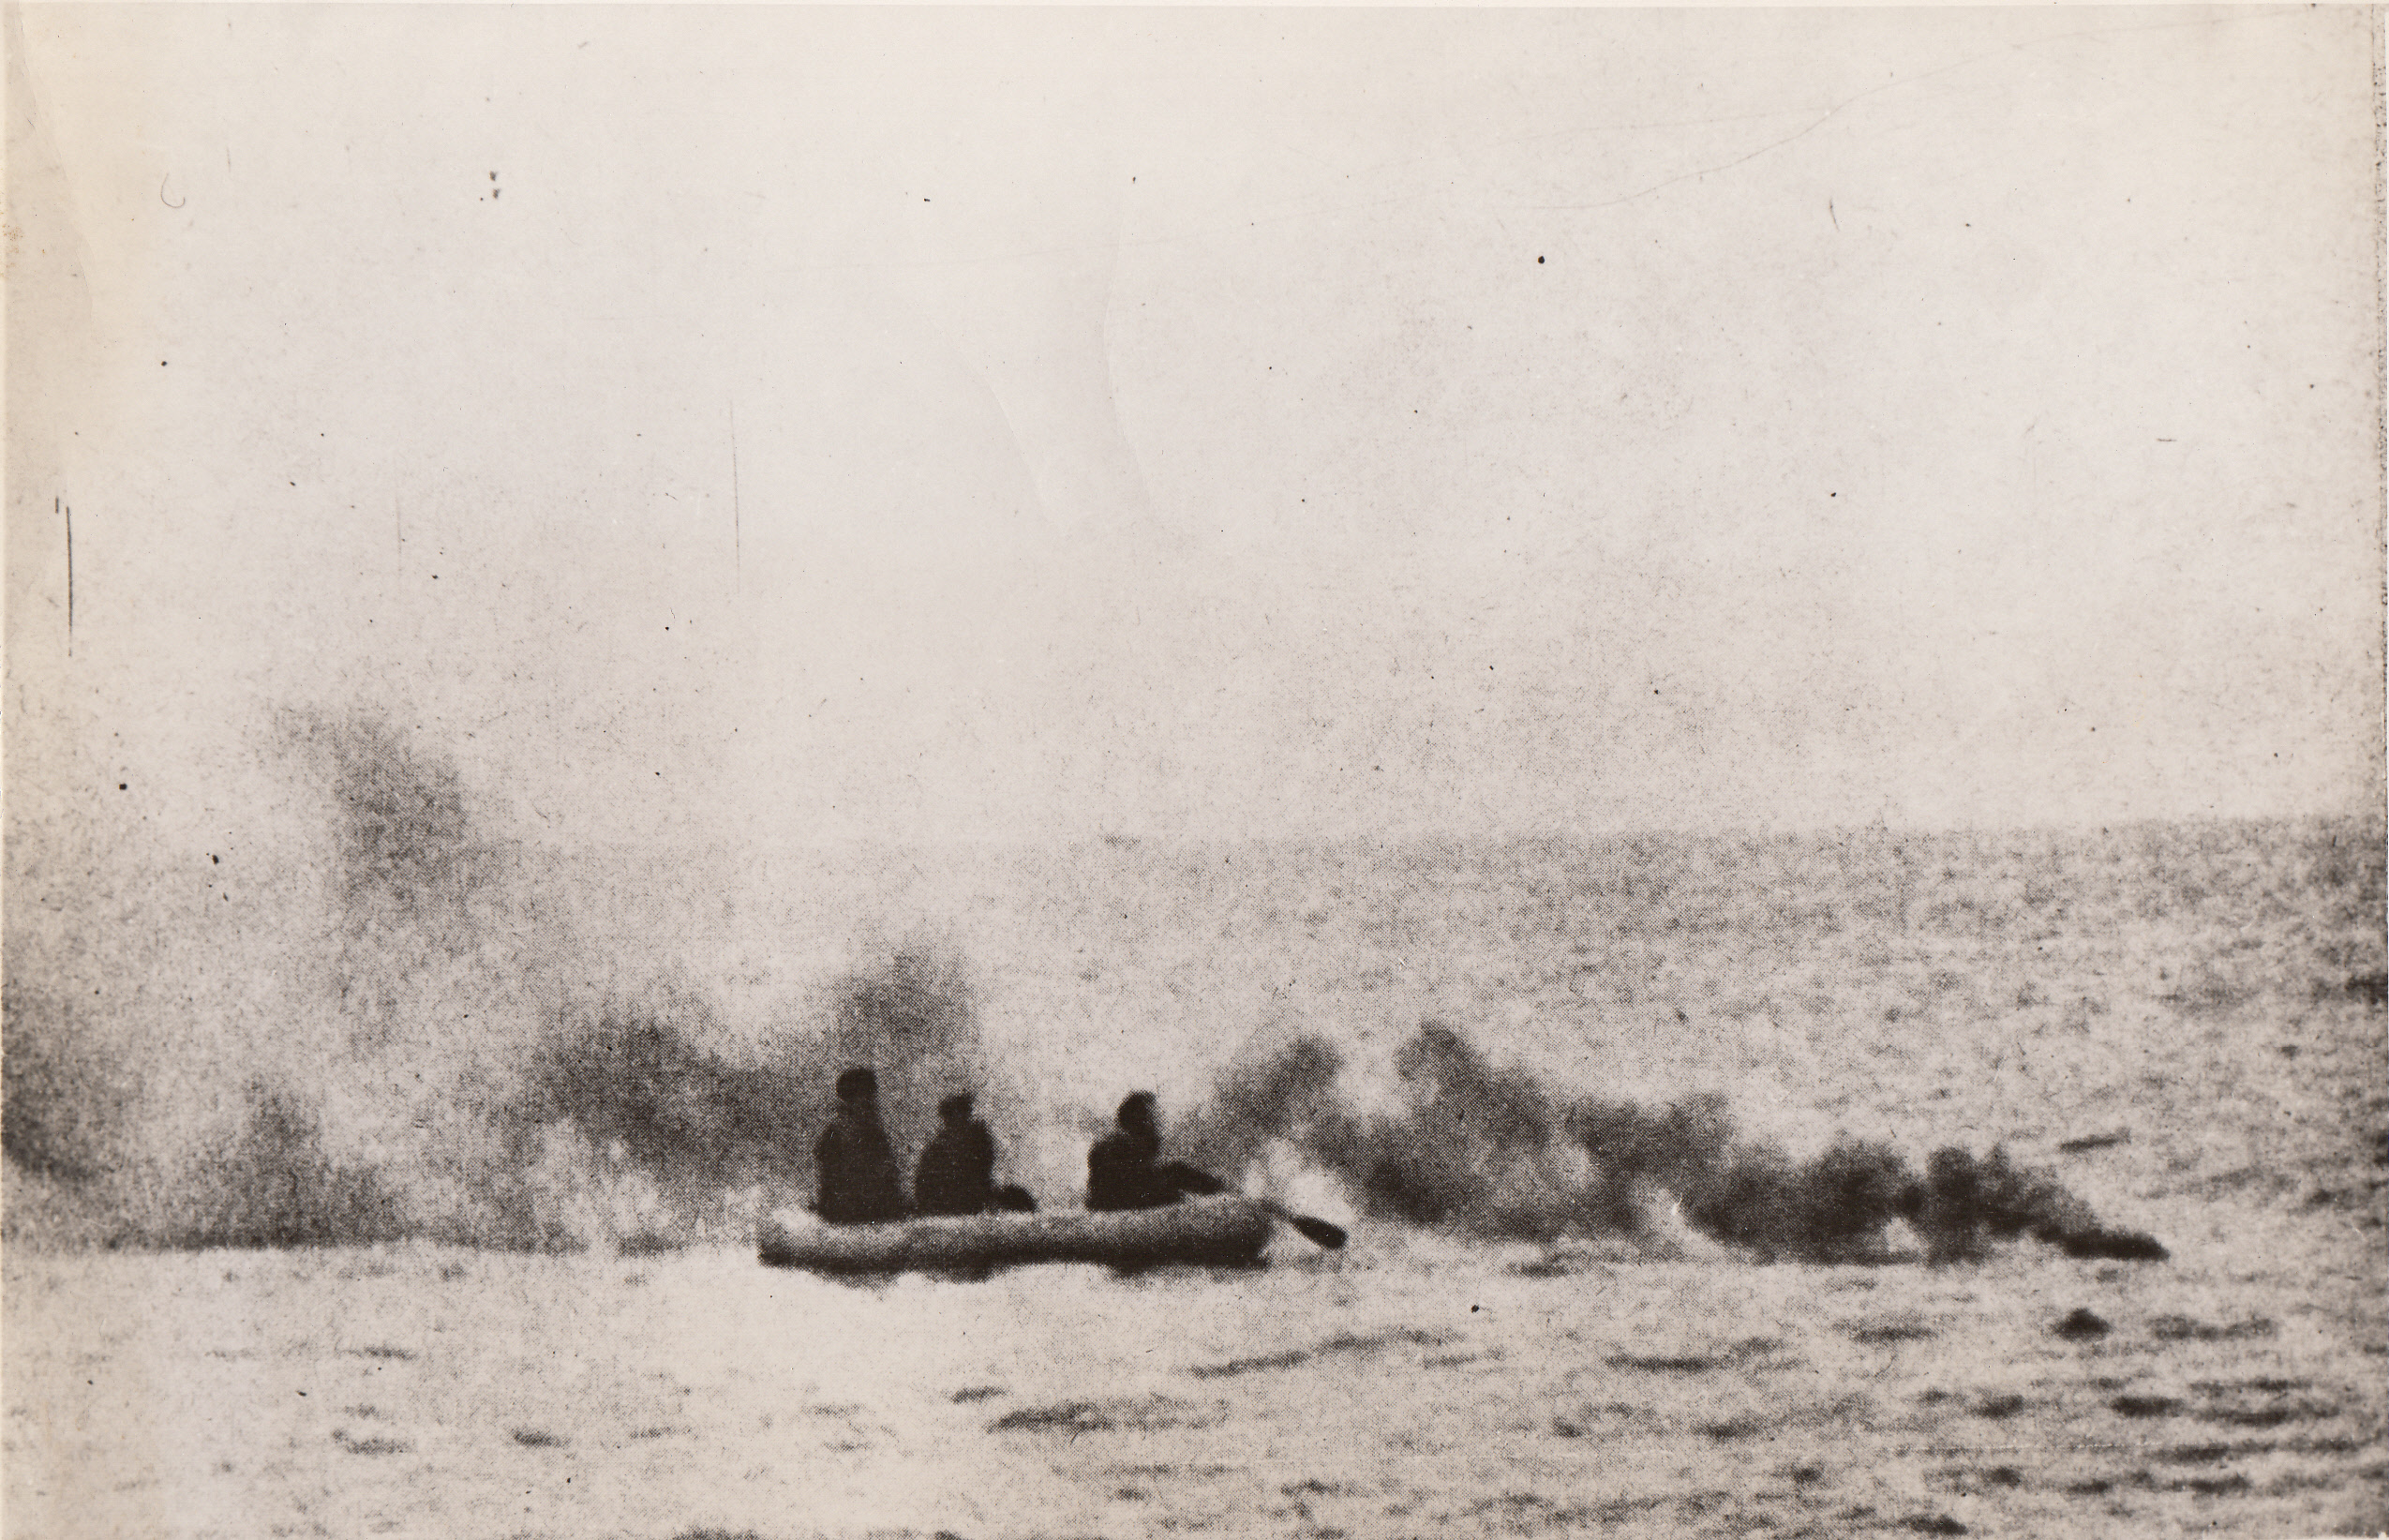 Yanks, Say the Nazis, 1/27/1944. At Sea—The German Caption, accompanying this photo received through a neutral source, says these men (?) a life raft are American Airmen rowing away from the burning wreckage of their sinking plane. Shortly afterward, they were picked up by a Nazi seaplane.;